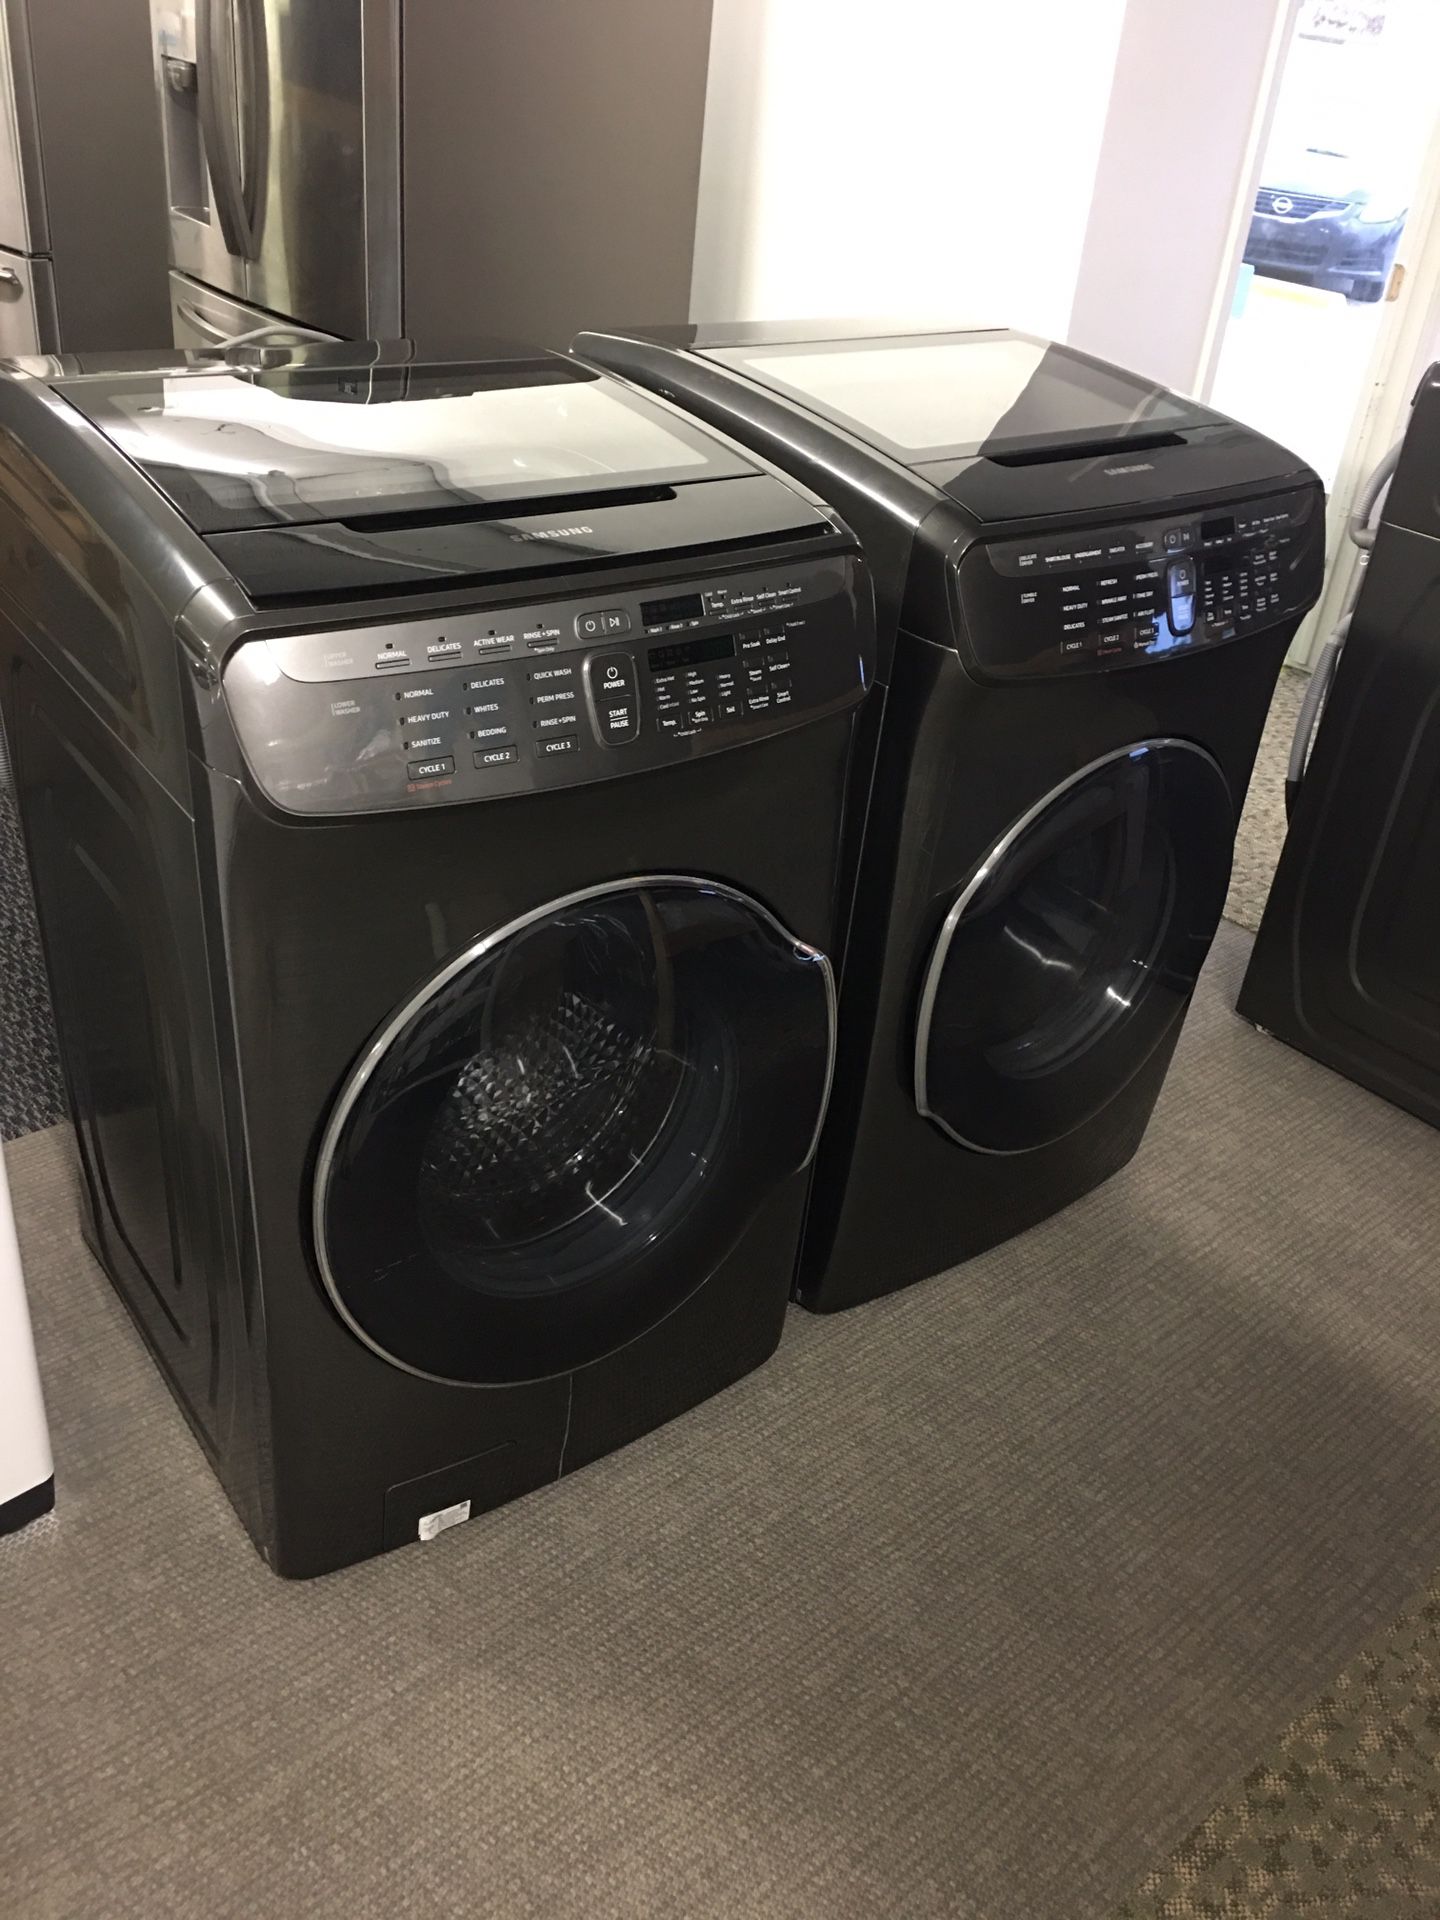 Samsung Black Stainless Steel Smart Set Washer And Dye King Size Capacity With Warranty No Credit Check Just $54 Down Payment Cash Price $2099